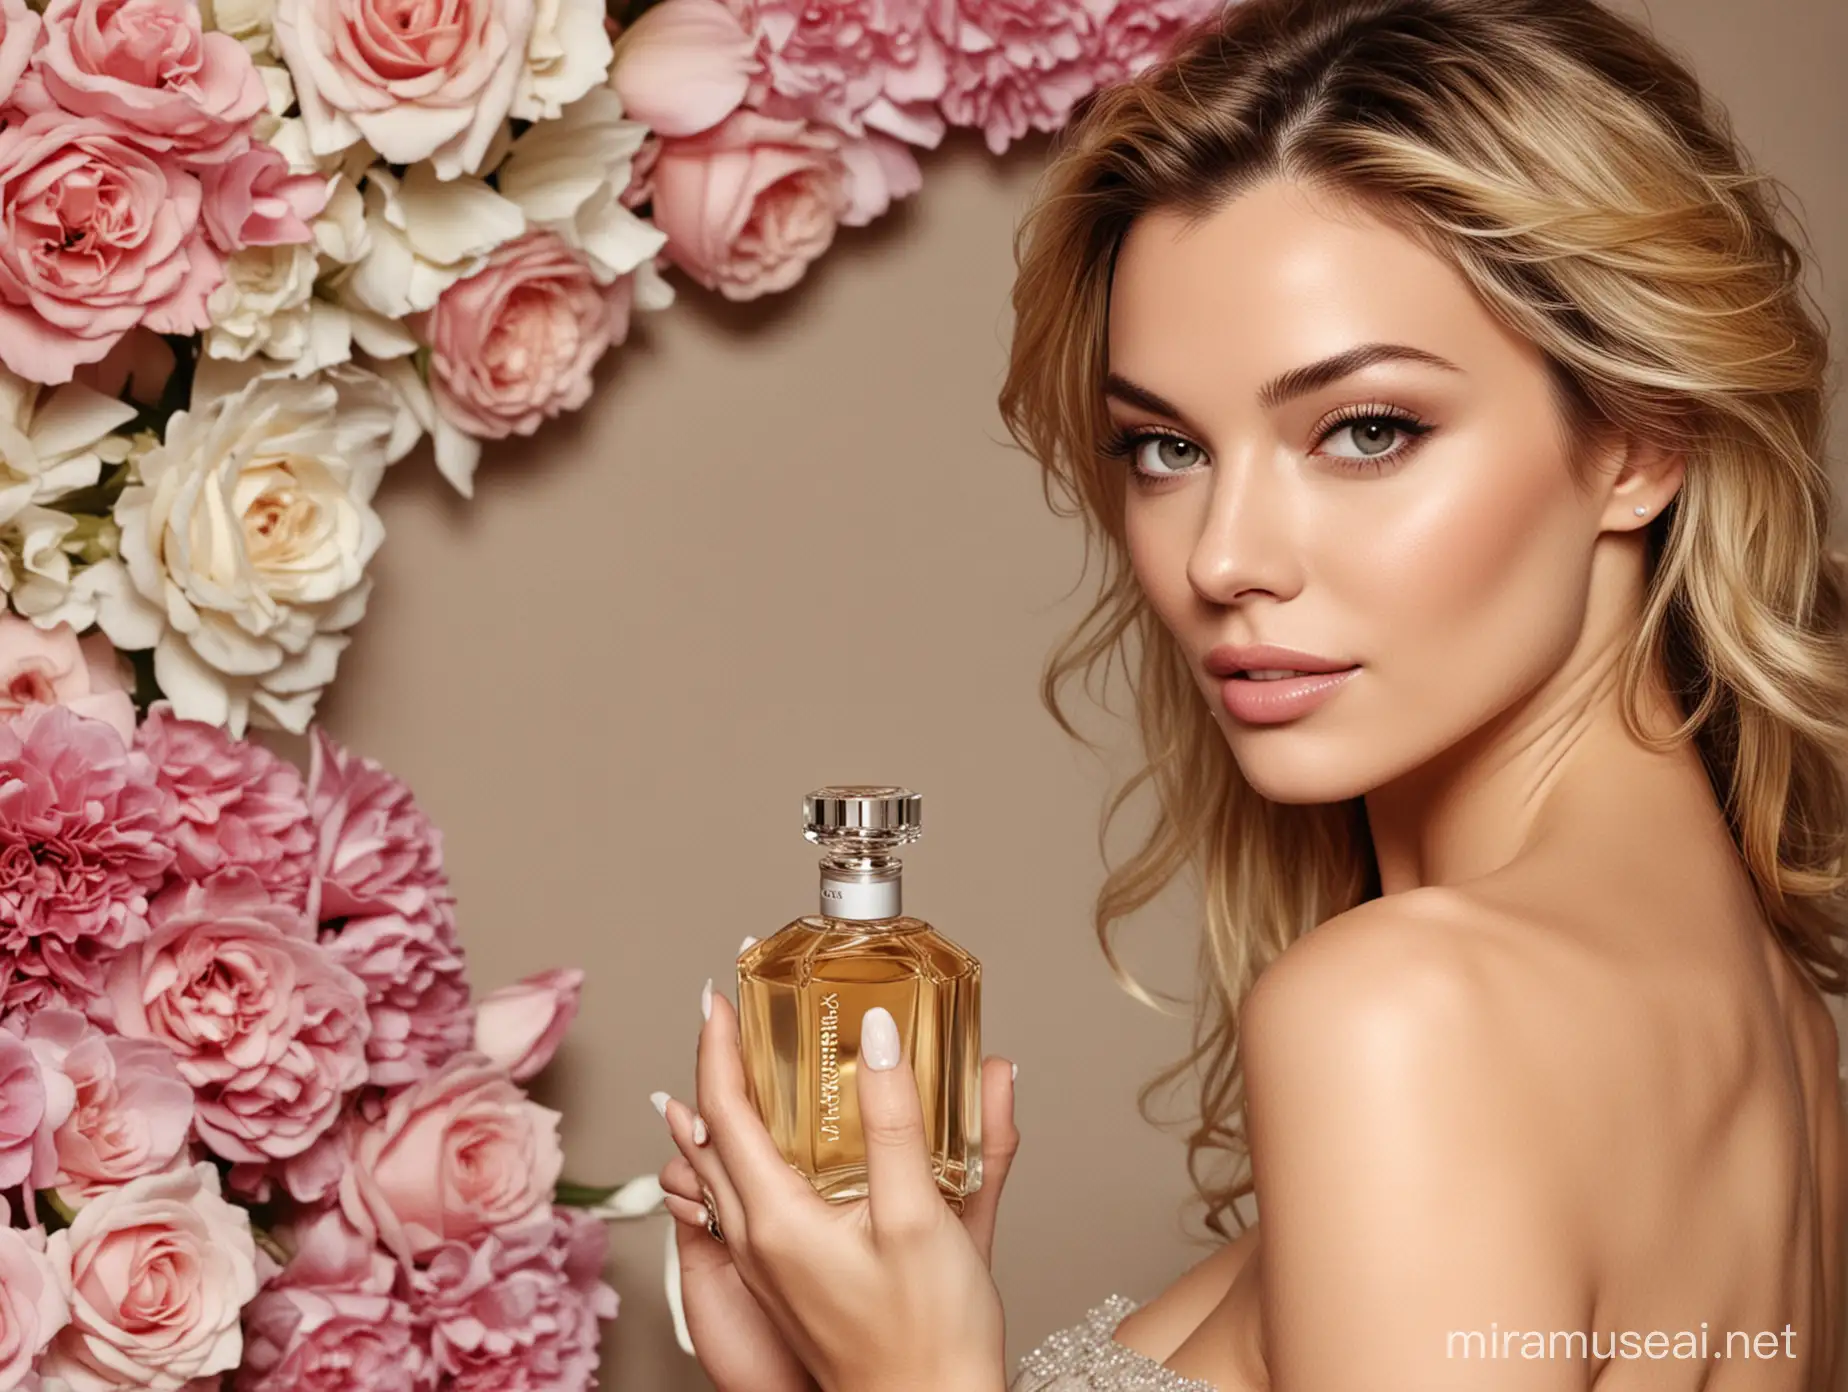 Celebrity Influence on the Popularity of Natural Perfumes

Analyze how public figures and celebrities have embraced natural perfumes and contributed to their popularity, including specific endorsements or launches.